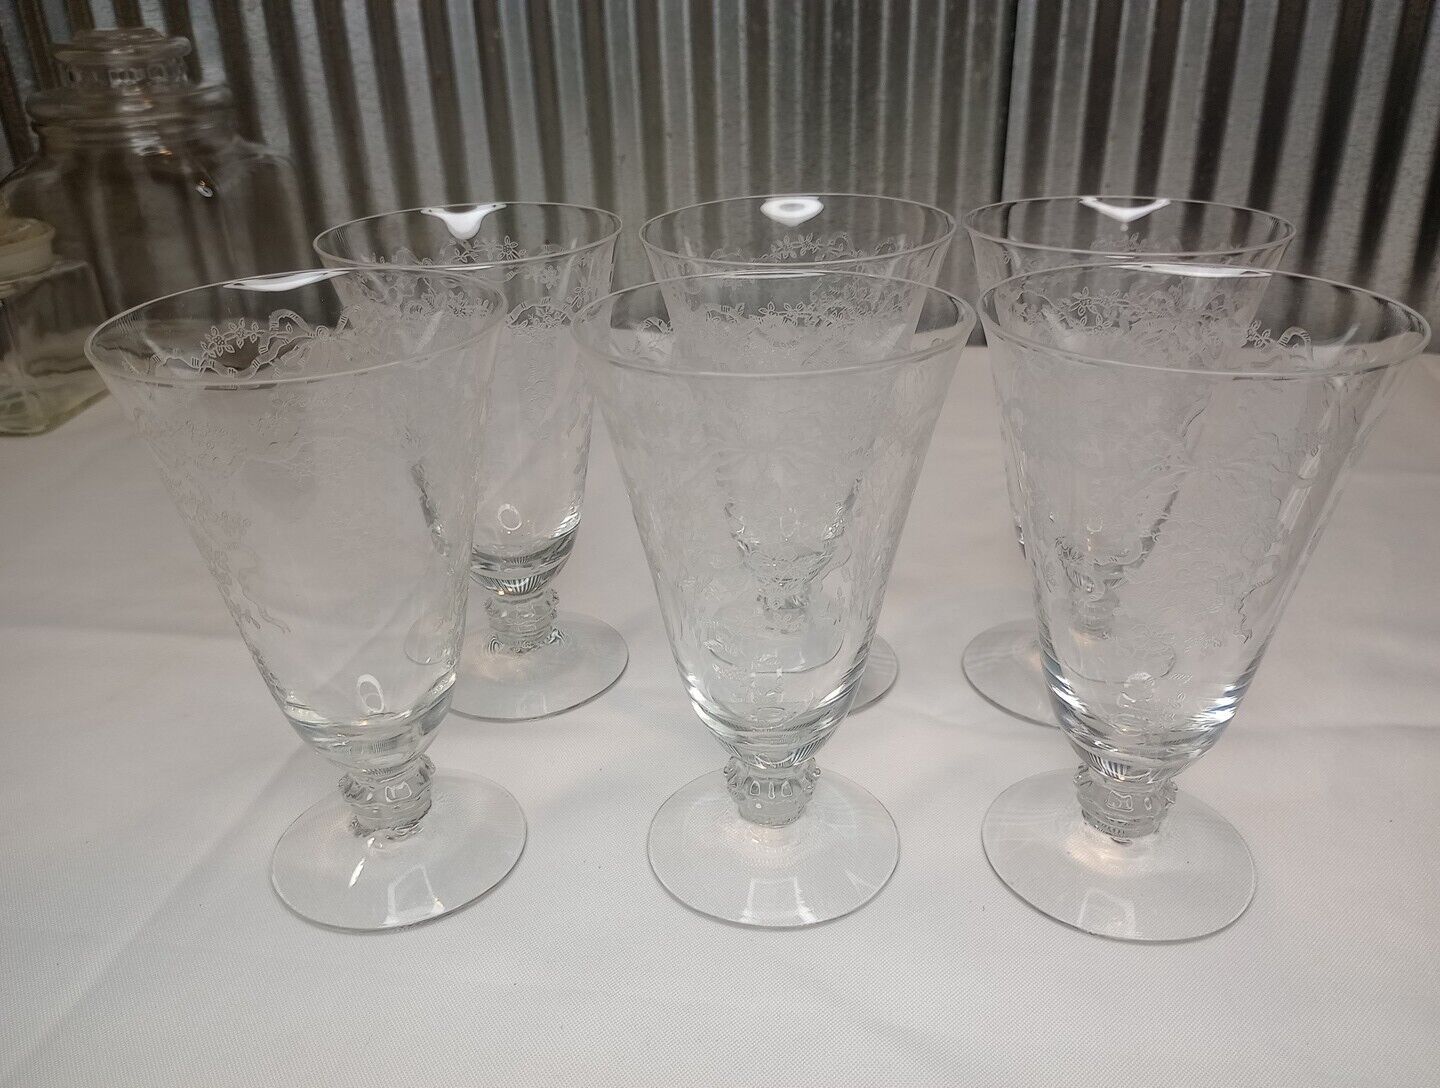 Lot of 6 Fostoria Romance Etched Crystal Footed Water Goblets / Tea Glasses